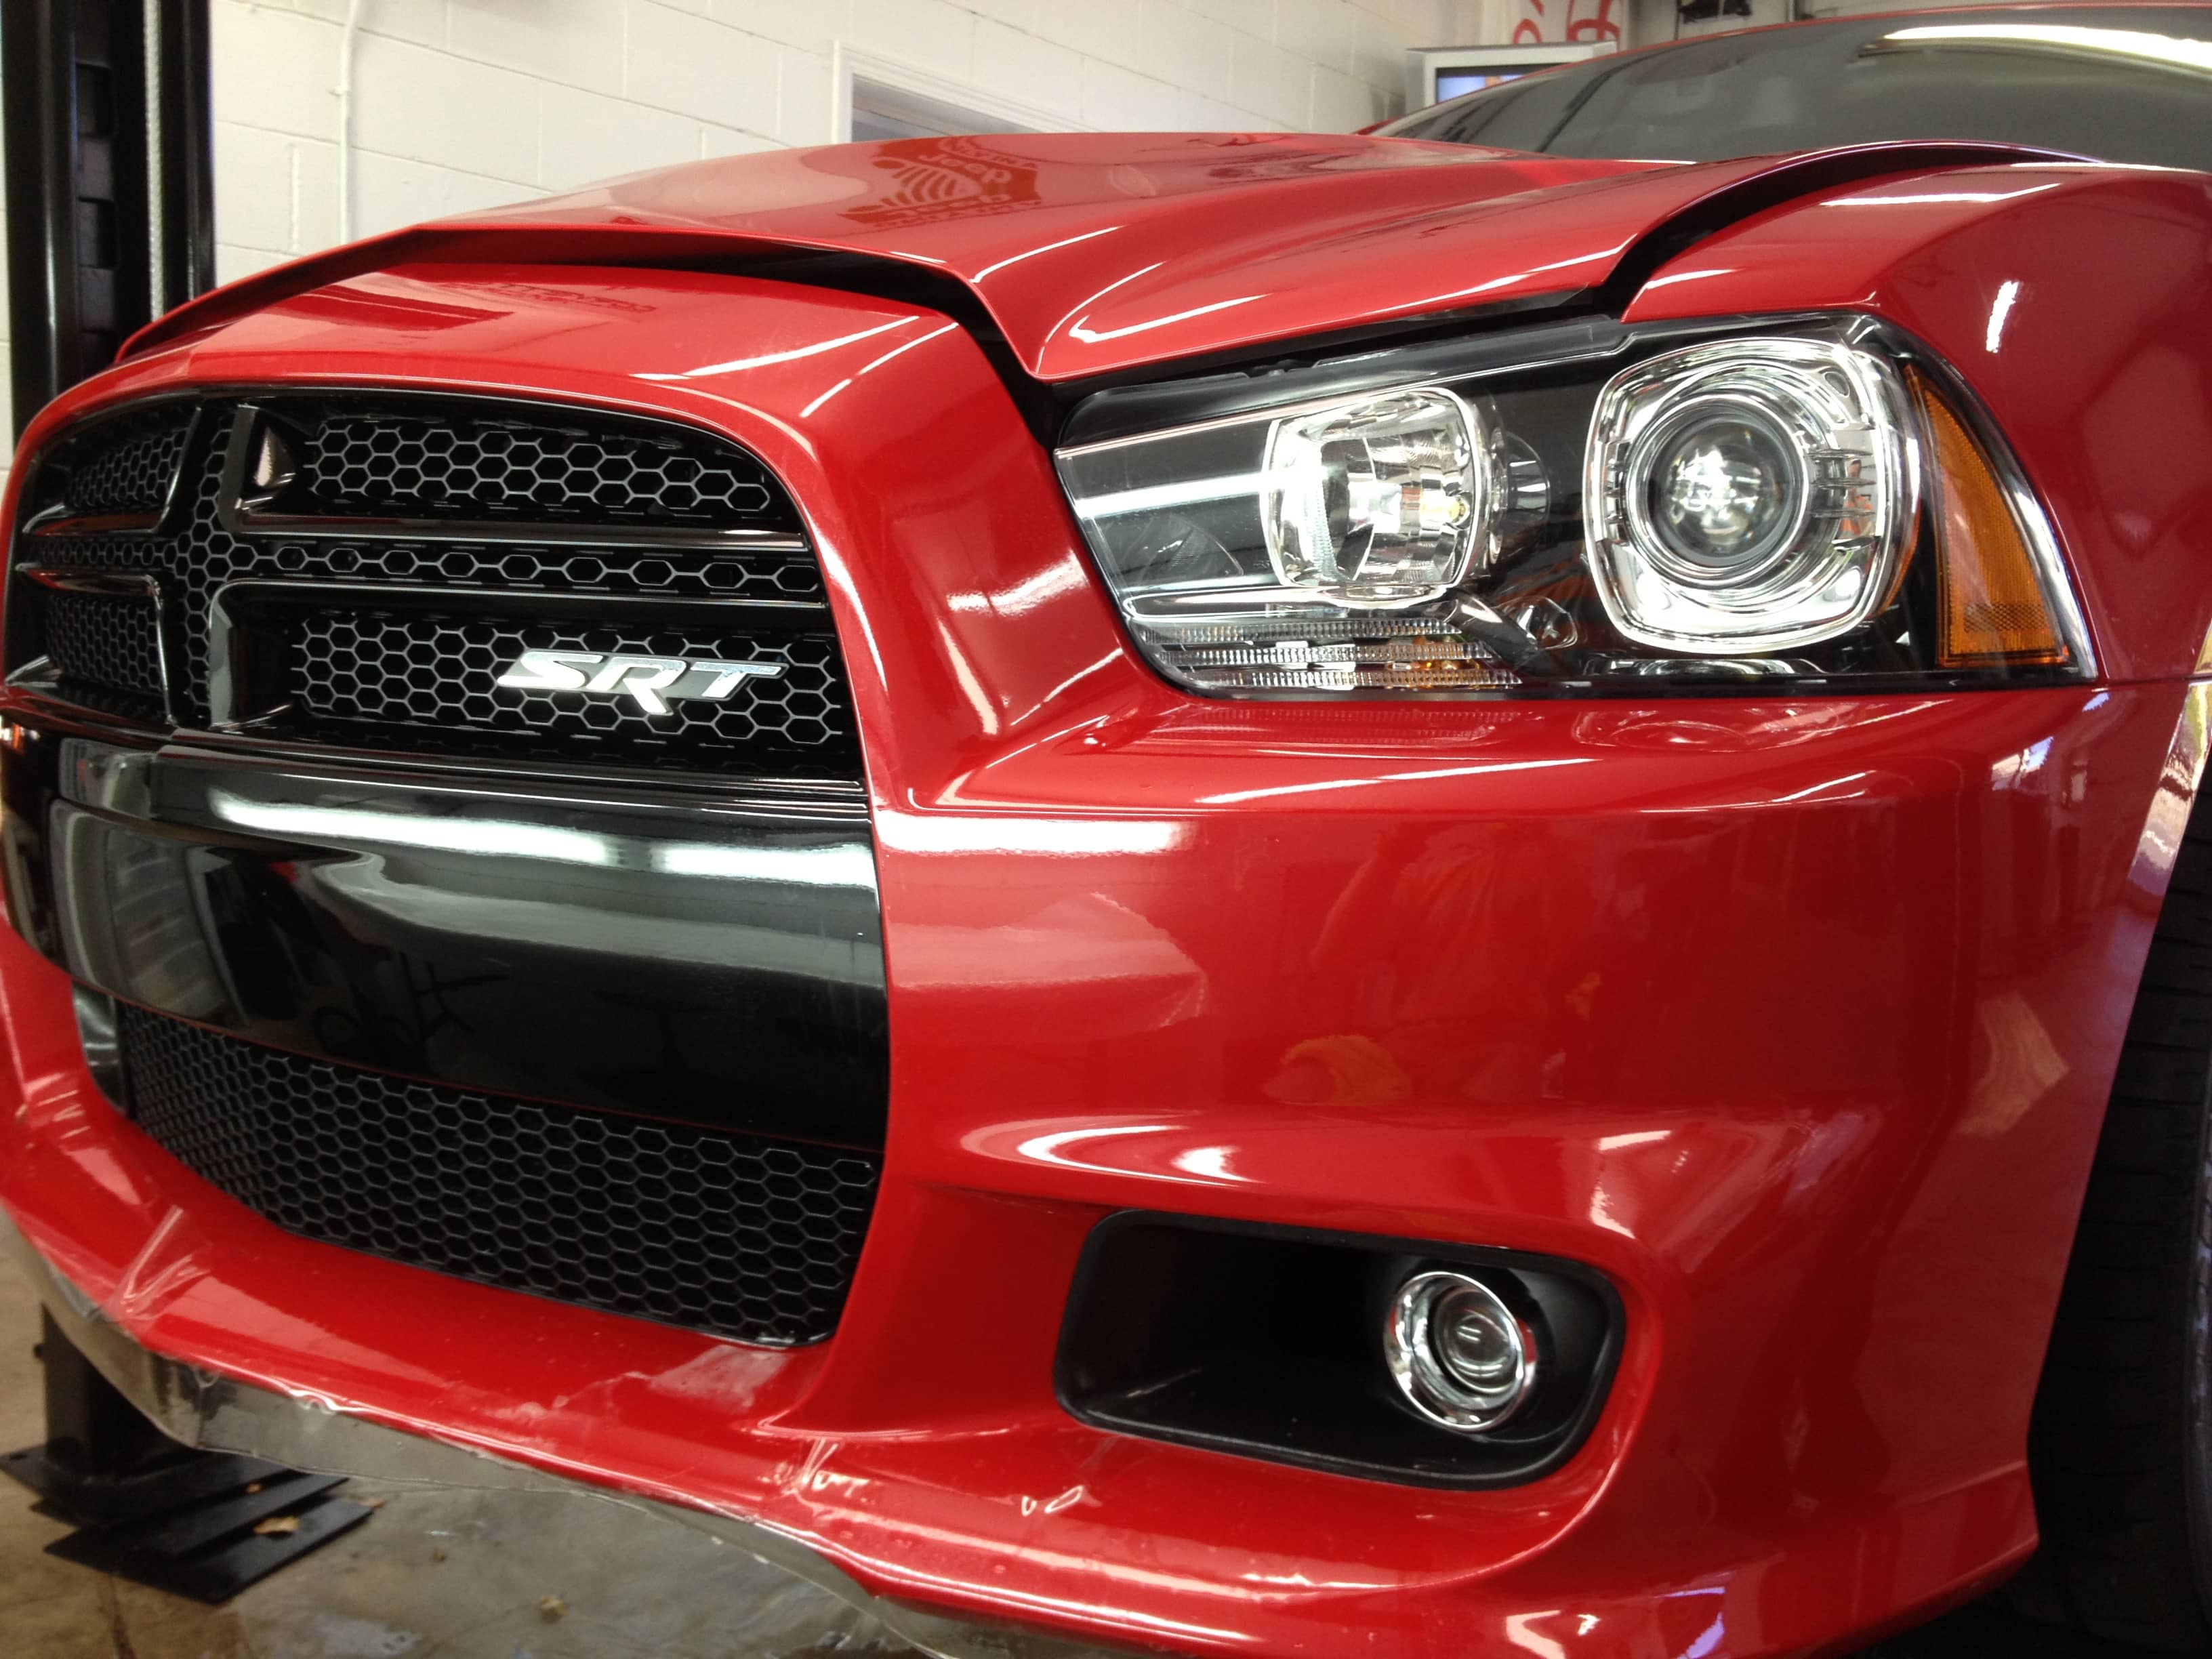 2013 Dodge Charger SRT-8 clear auto bra St. Louis chip guard Xpel Ultimate